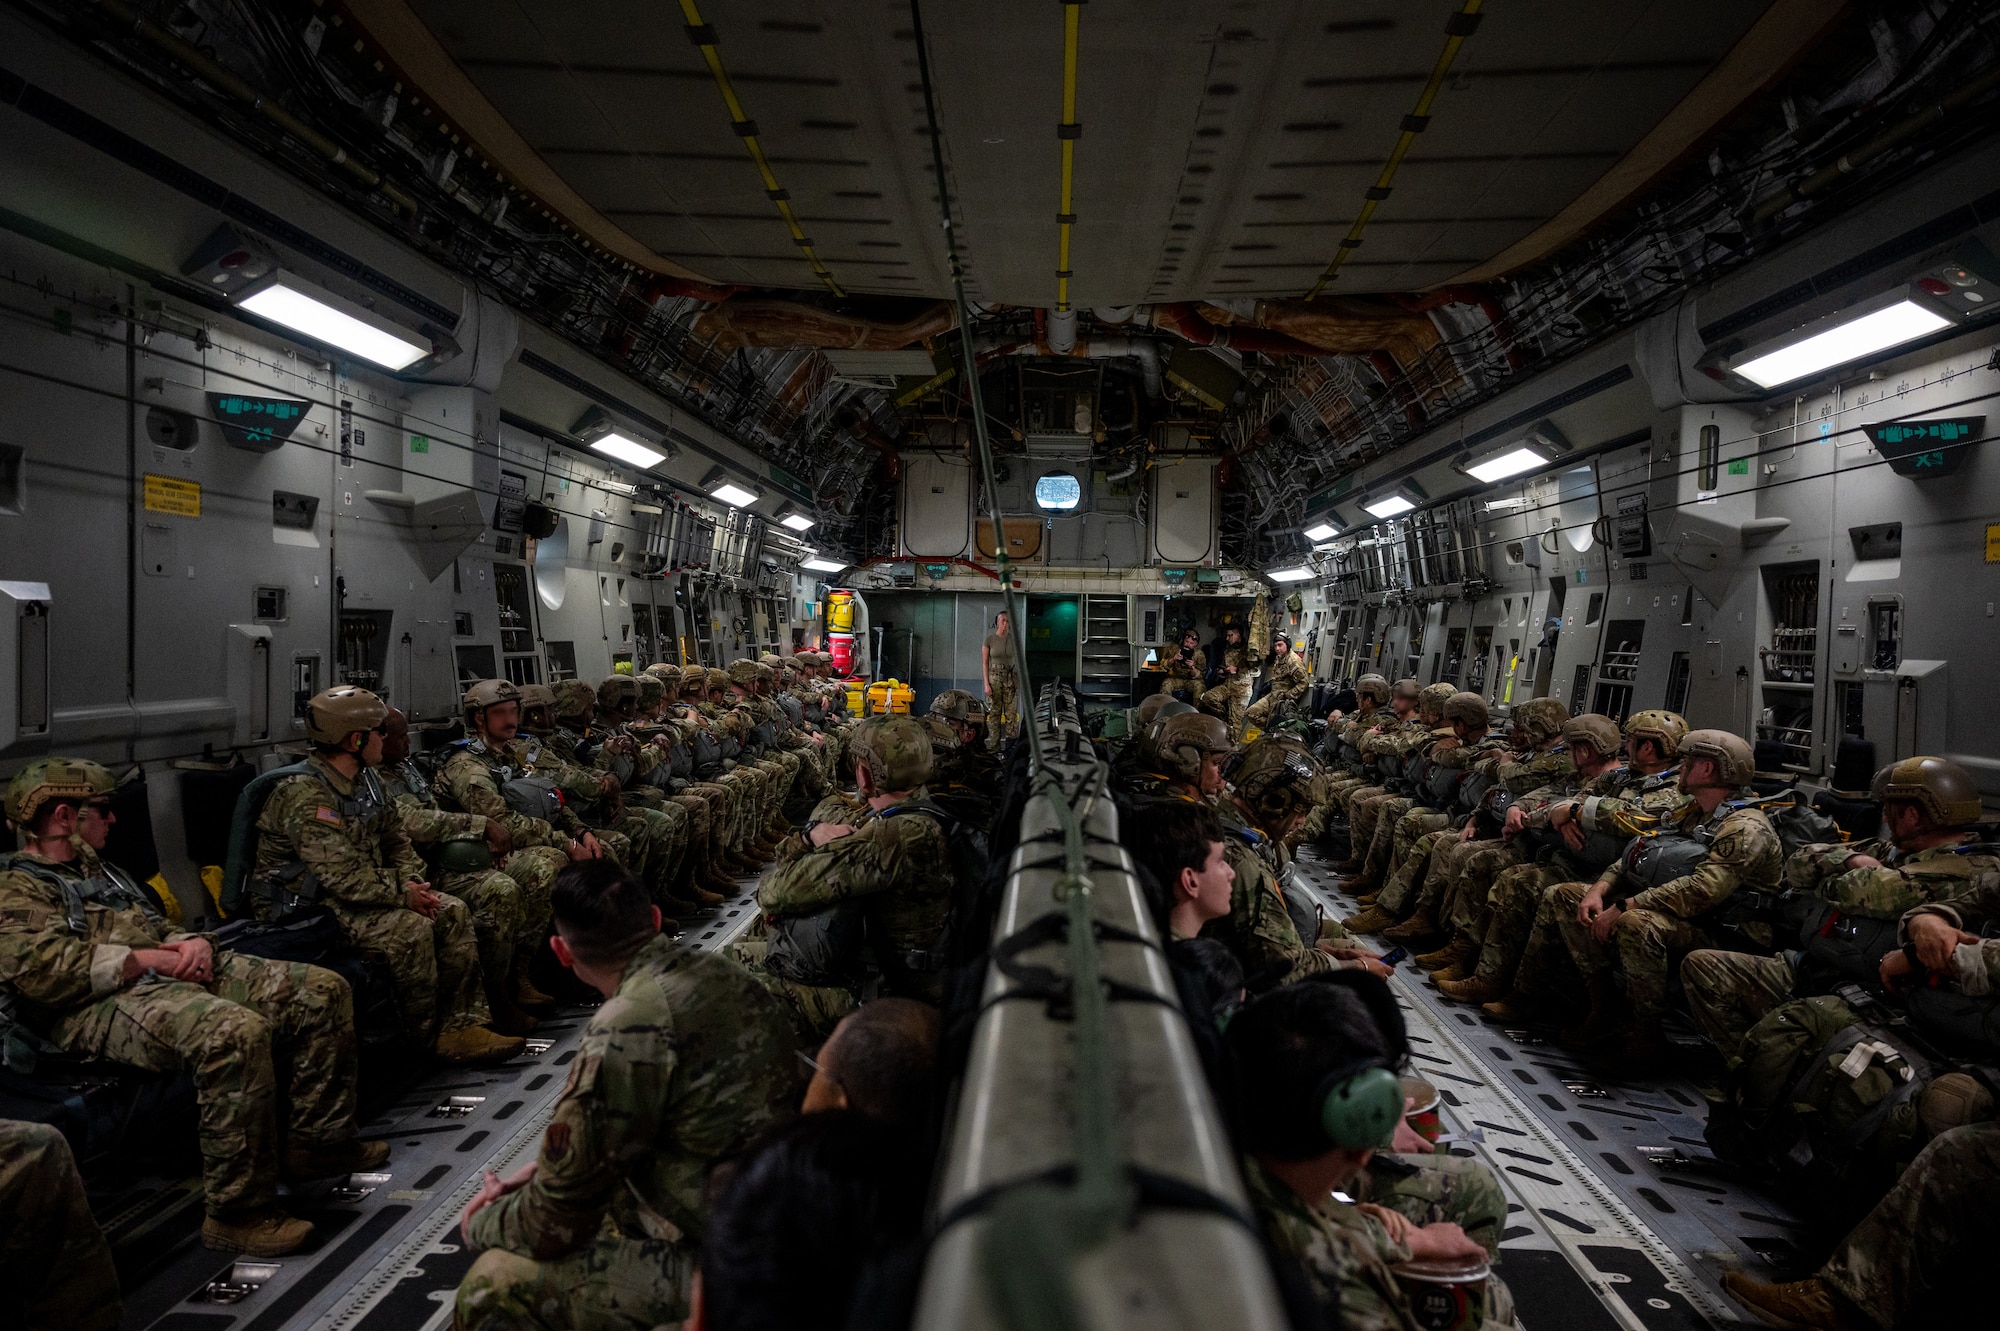 U.S. Special Operations Command Korea personnel sit inside a U.S. Air Force C-17 Globemaster III before airborne jump training during Korea Flight Training 24 at Osan Air Base, Republic of Korea, April 18, 2024. KFT 24 is a routine training designed to prepare combined forces for the deterrence of any potential threats through simulated combat scenarios. The U.S.-ROK. alliance is strengthened through integrated training, upholding commitments to maintain peace in Northeast Asia. (U.S. Air Force photo by Airman 1st Class Chase Verzaal) (This photo has been altered for security purposes.)